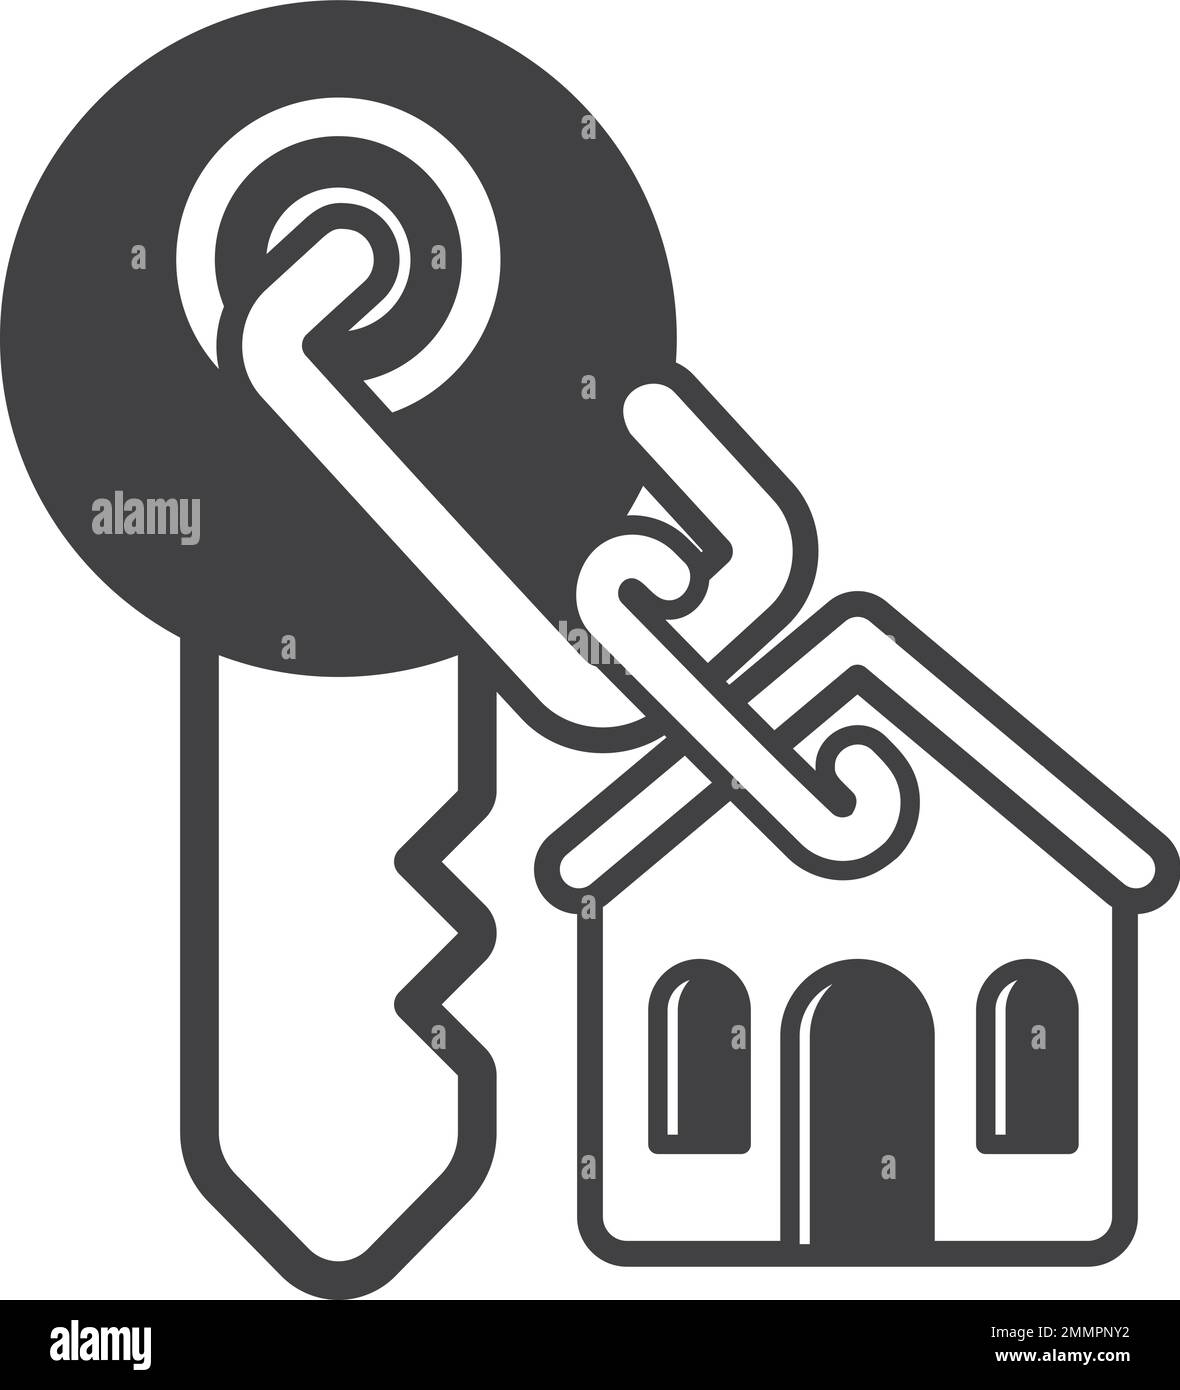 house and keys illustration in minimal style isolated on background Stock Vector